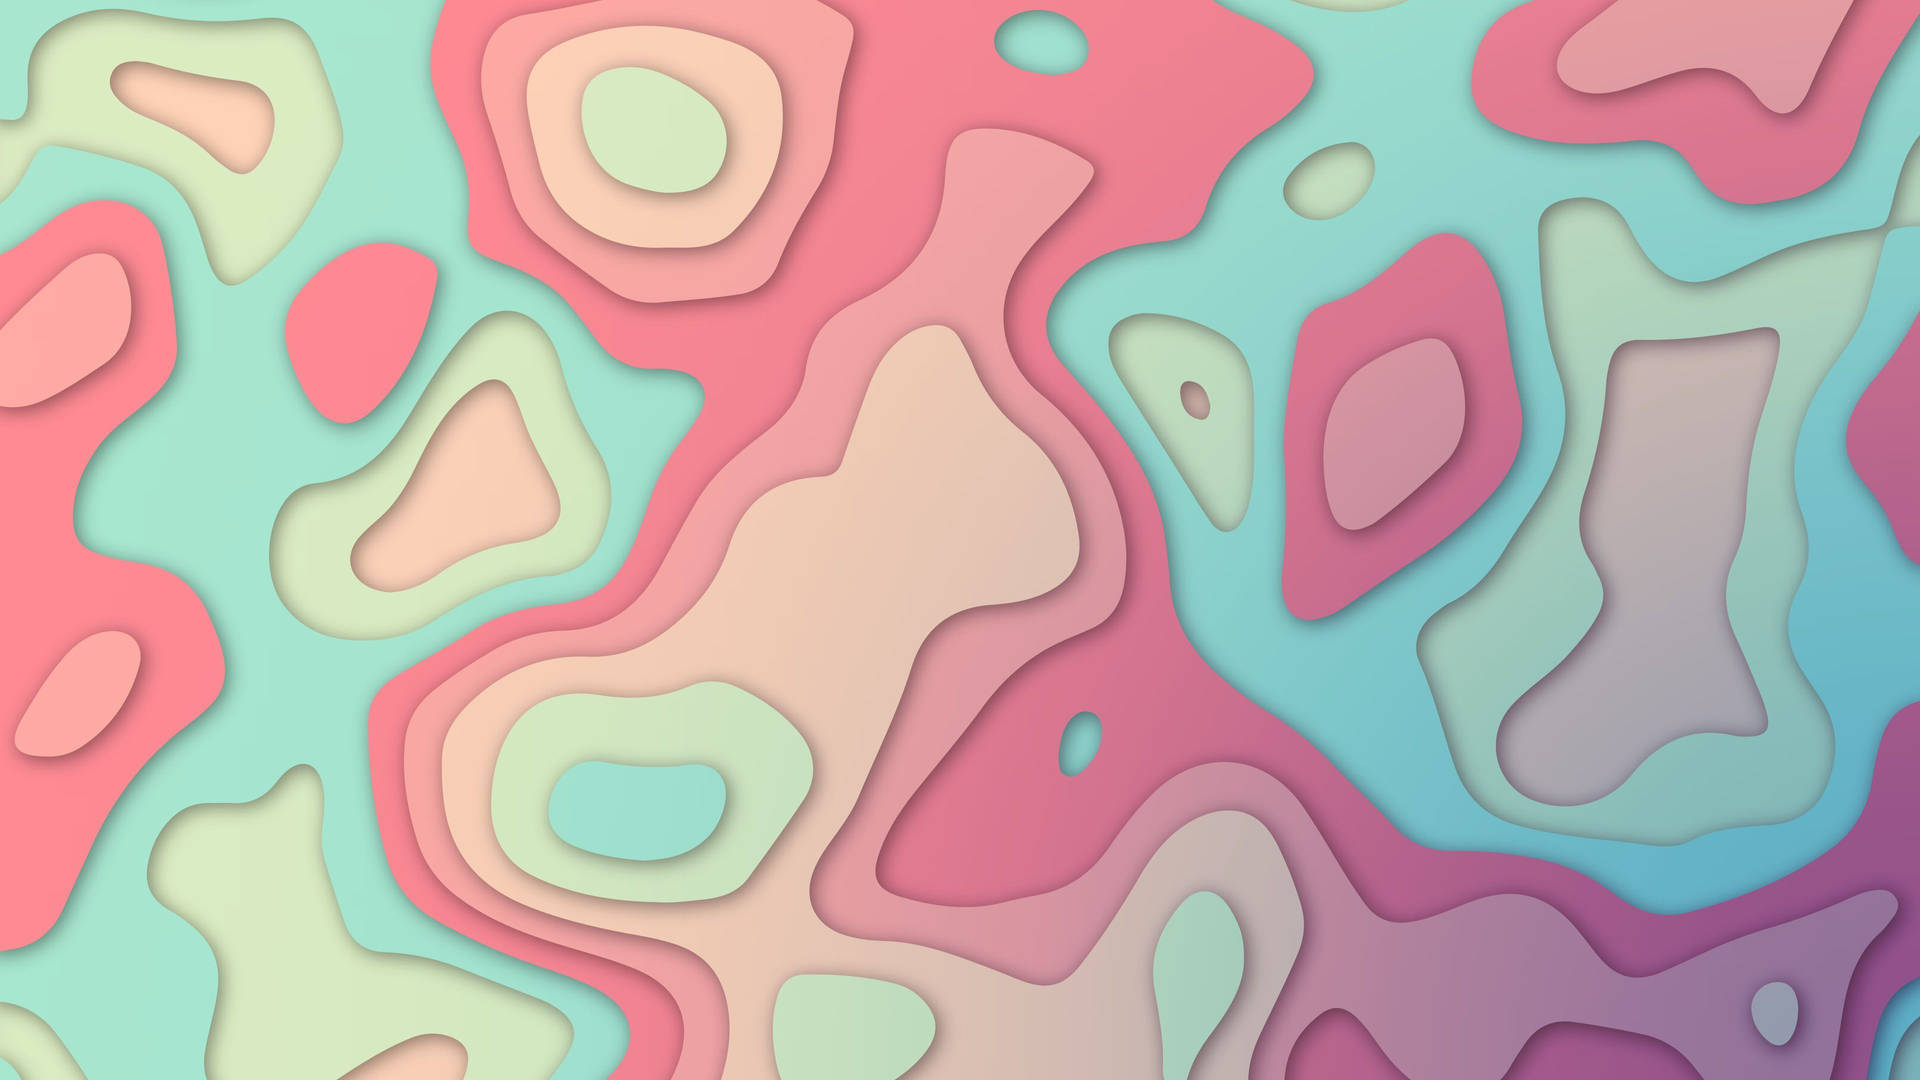 Abstract Art Pastel Aesthetic Tumblr Laptop Background